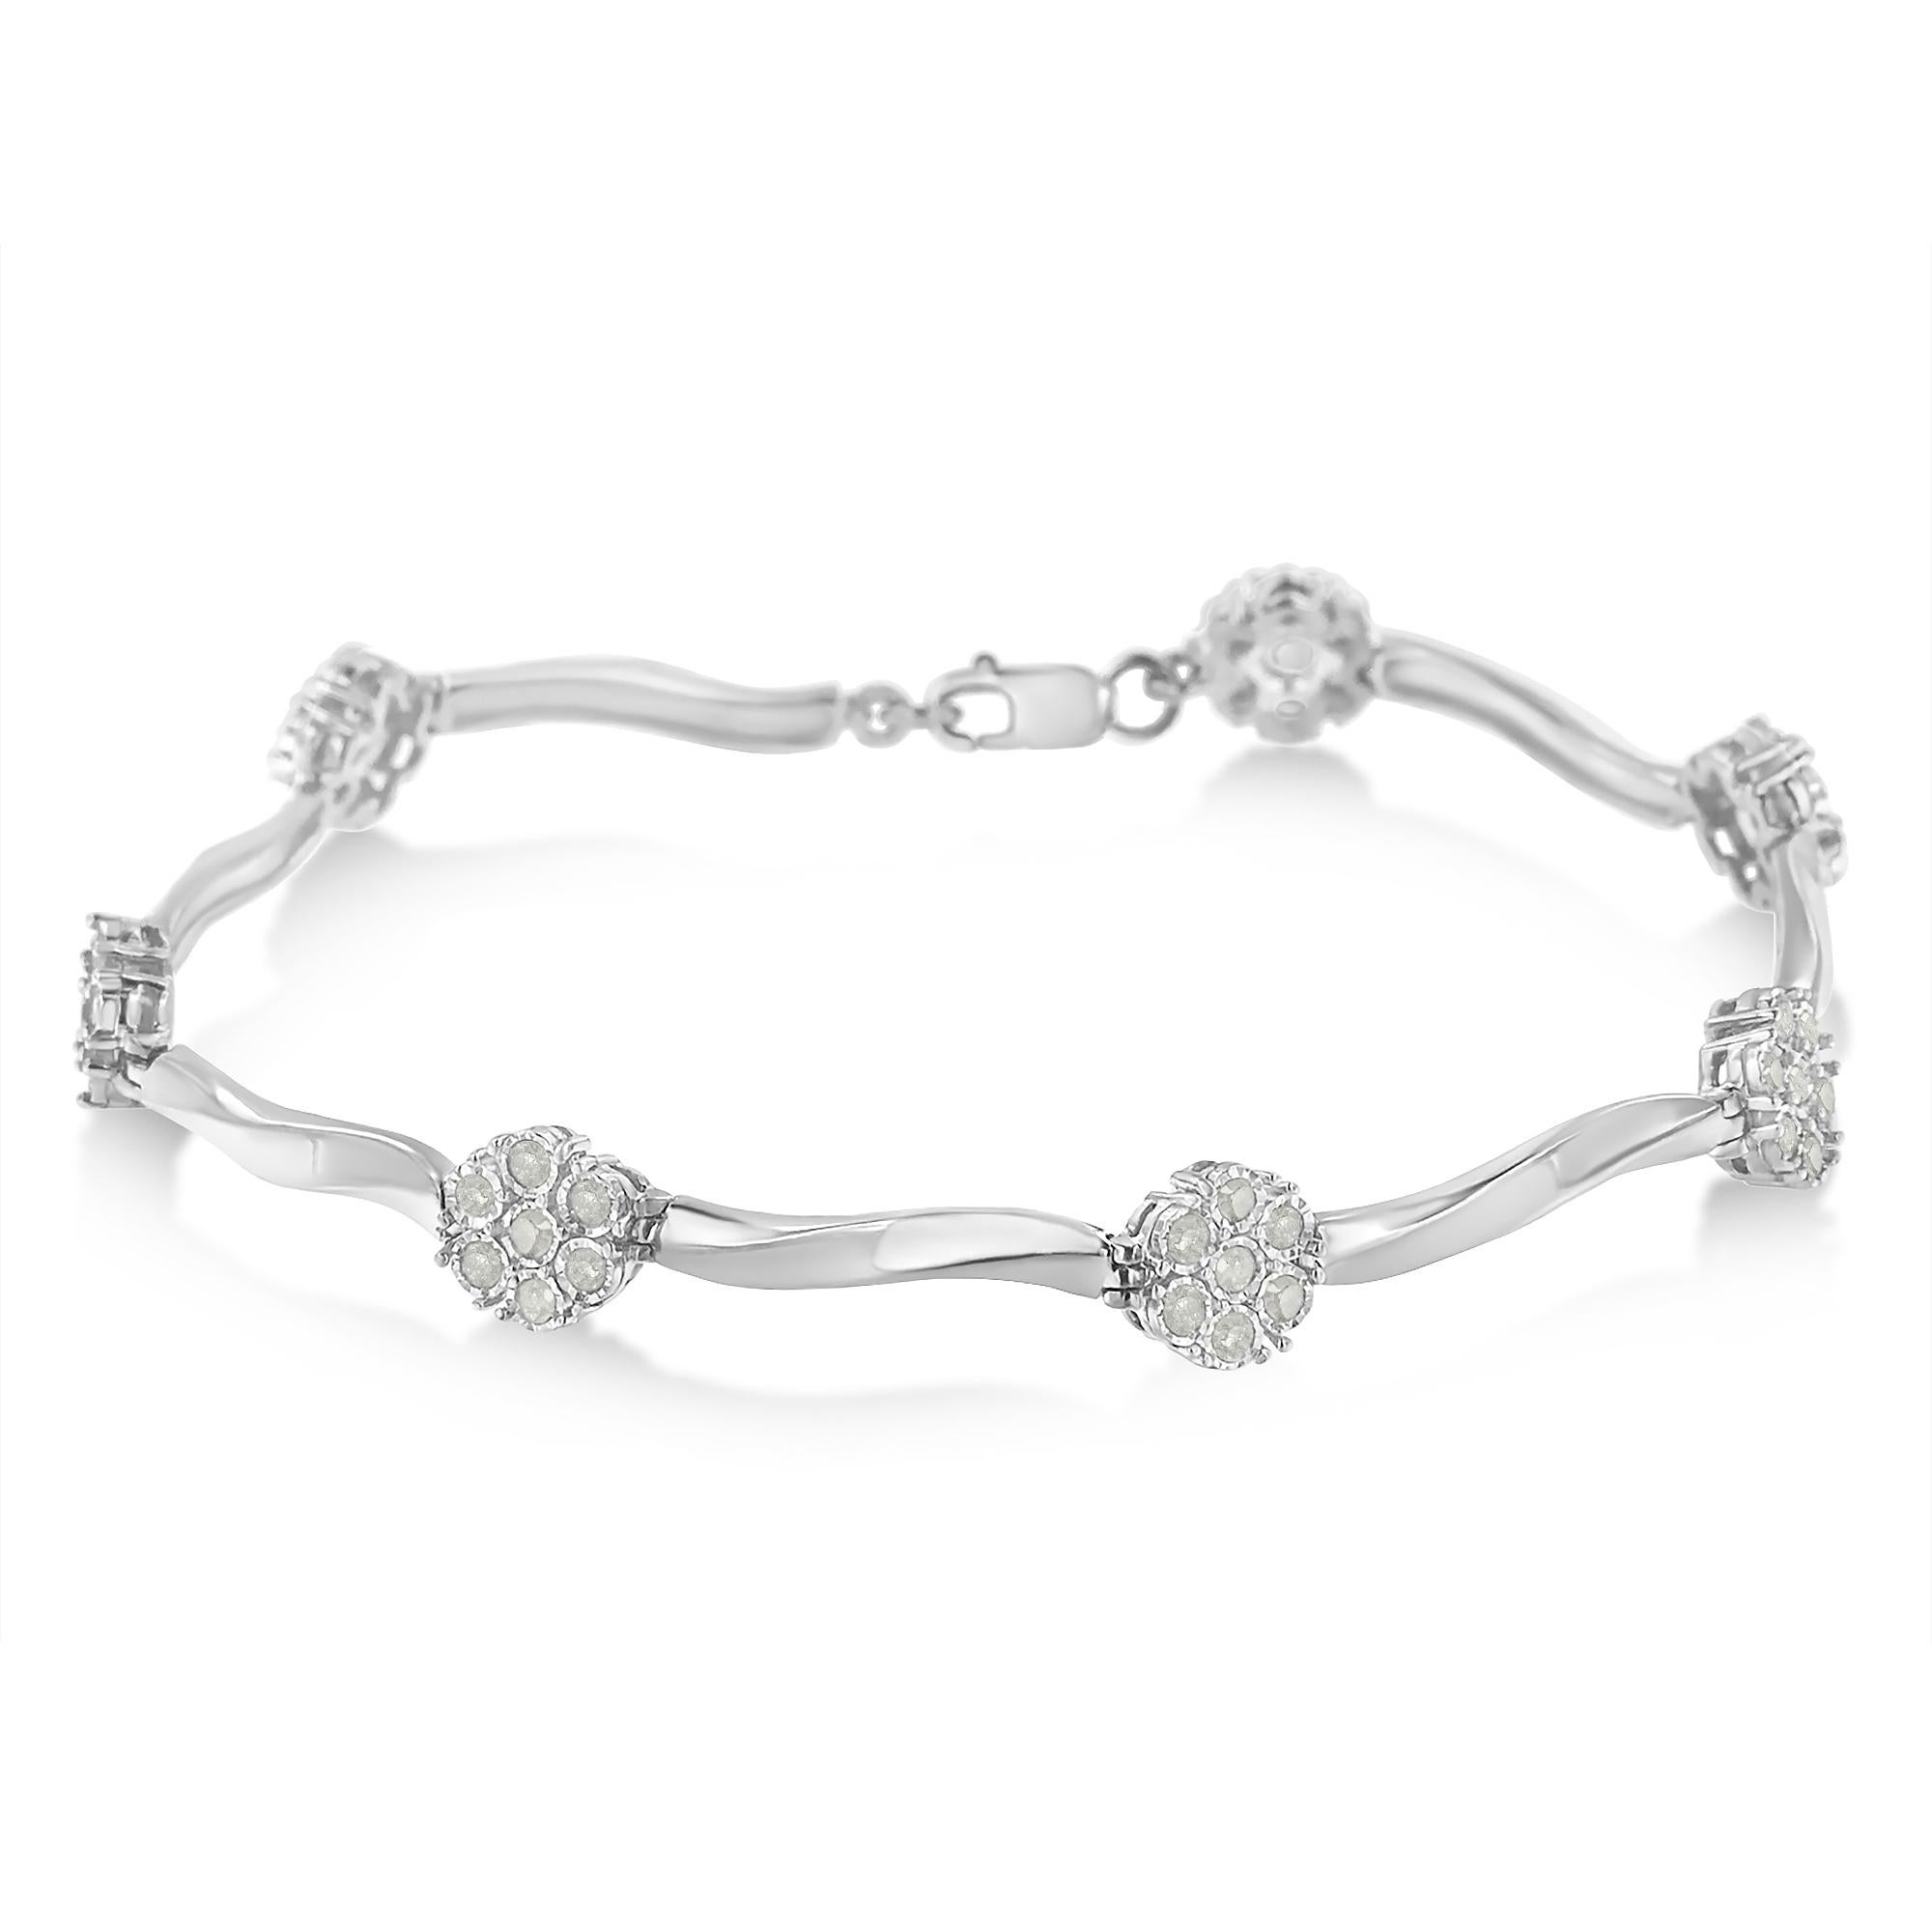 Elegant and timeless, this gorgeous sterling silver floral link bracelet features 1.0 carat total weight of round cut diamonds. The tennis bracelet features round, flower shaped cluster links along with an elongated S wave  link. The round links are